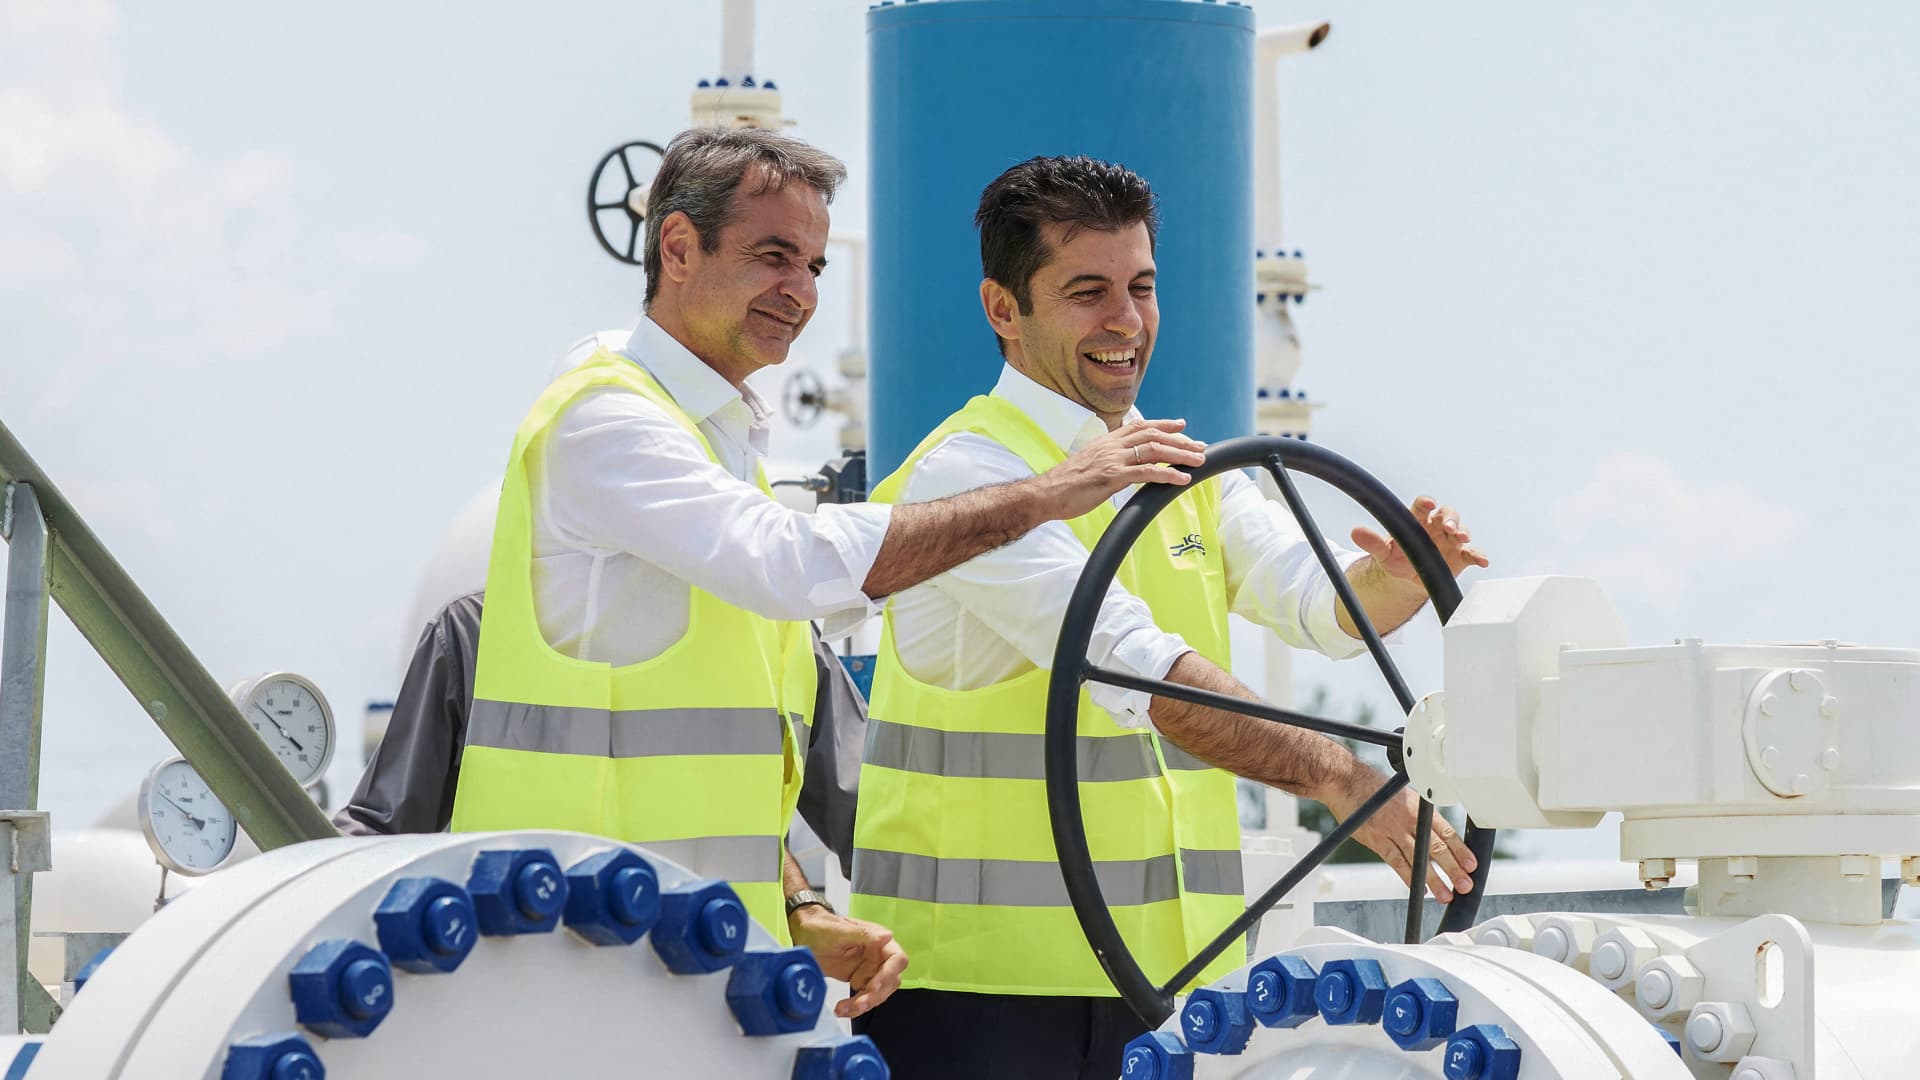 Greek Prime Minister Kyriakos Mitsotakis (L) and his Bulgarian counterpart Kiril Petkov take part in the inauguration ceremony of the Interconnector Greece-Bulgaria (IGB) gas pipeline, in Komotini, northern Greece, on July 8, 2022.